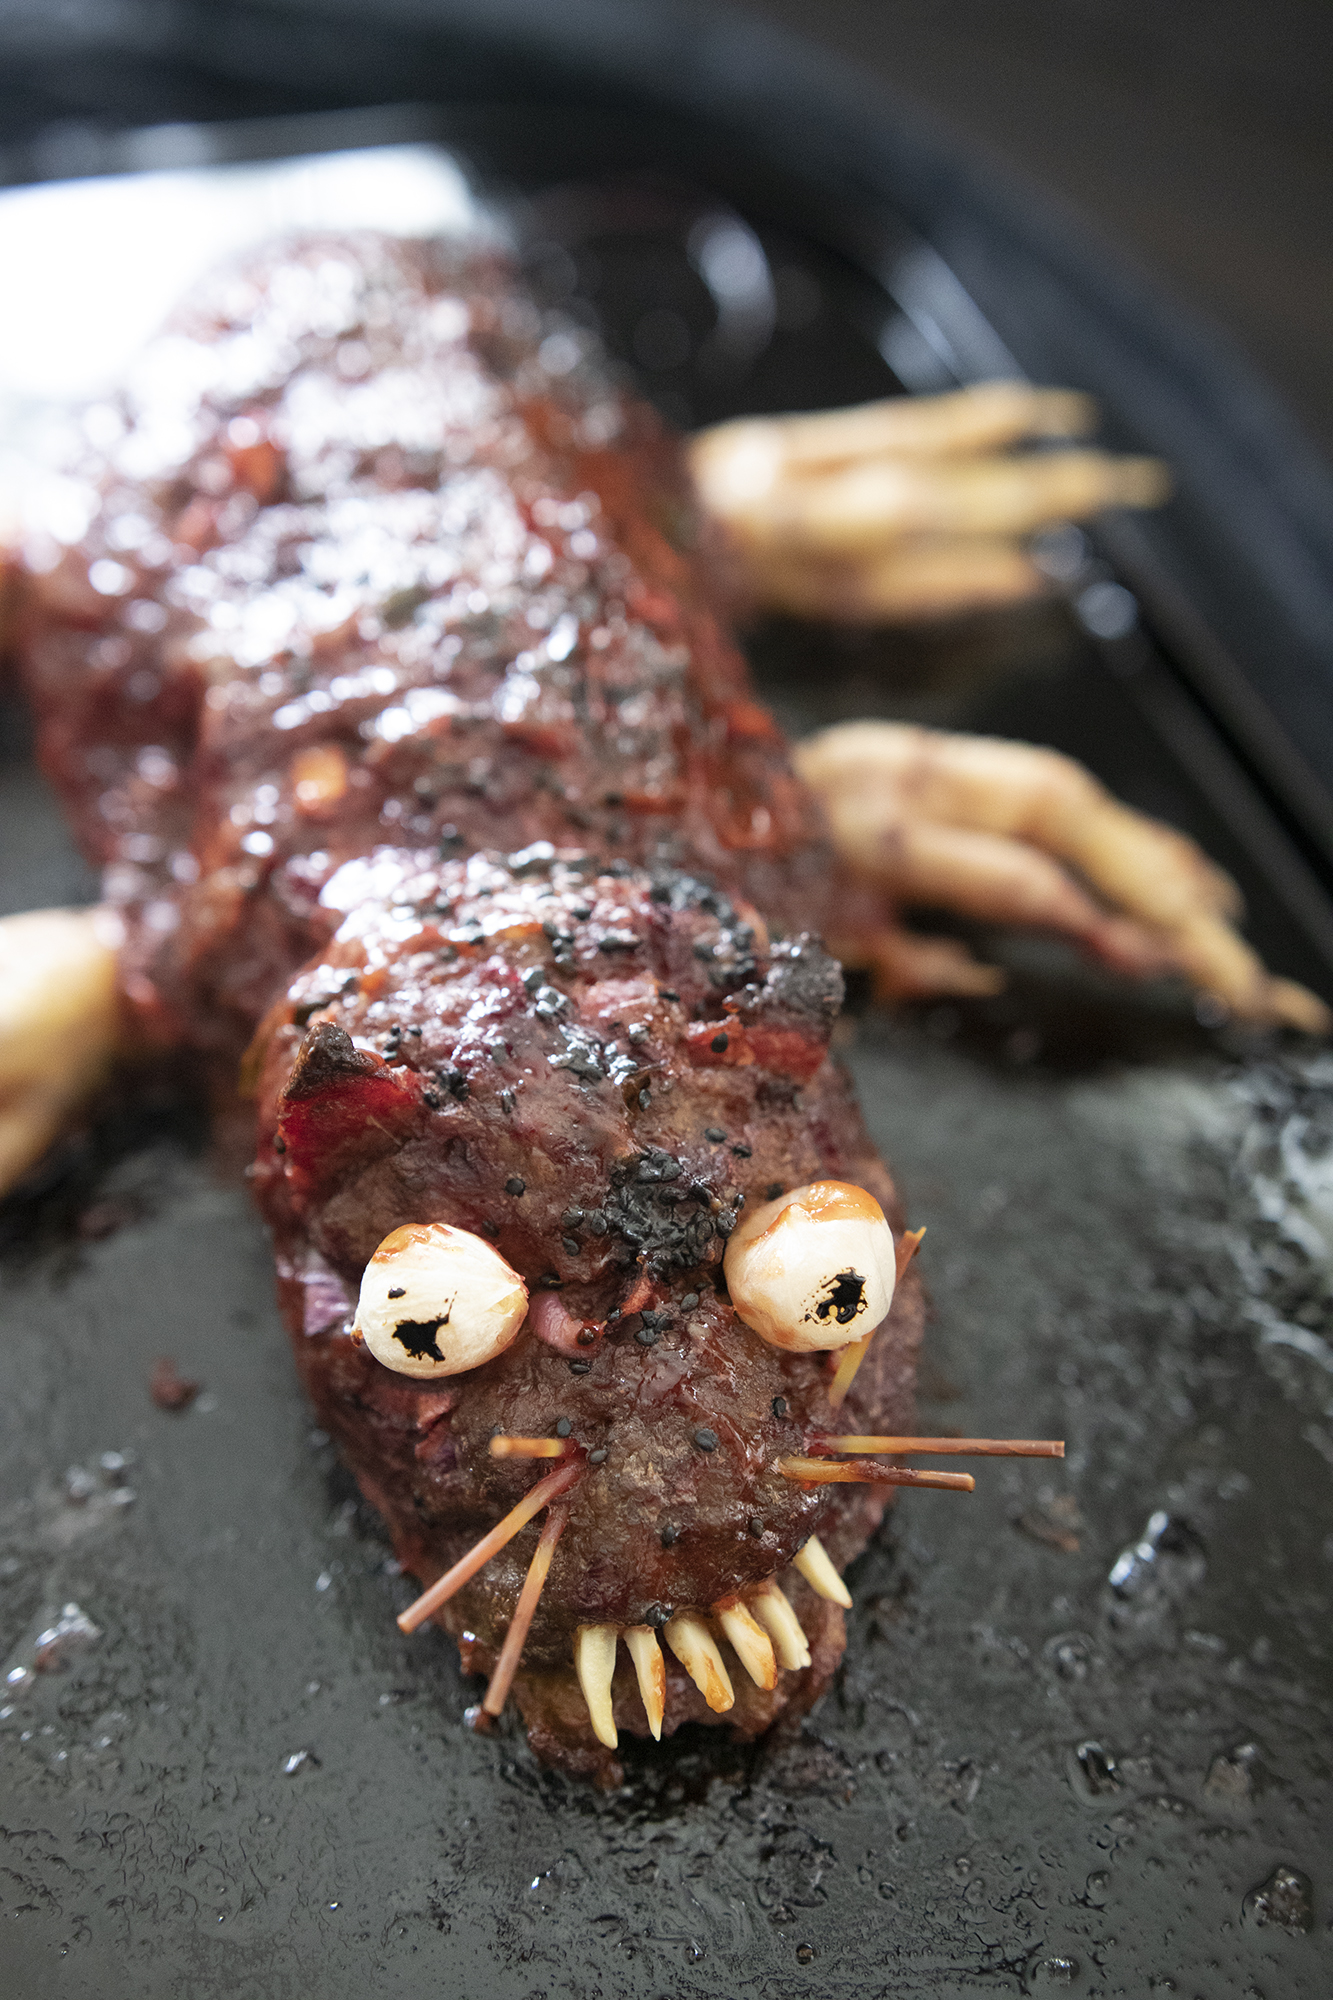 Halloween Beet Rat - Meatloaf made with Beets in a rat shape picture pic